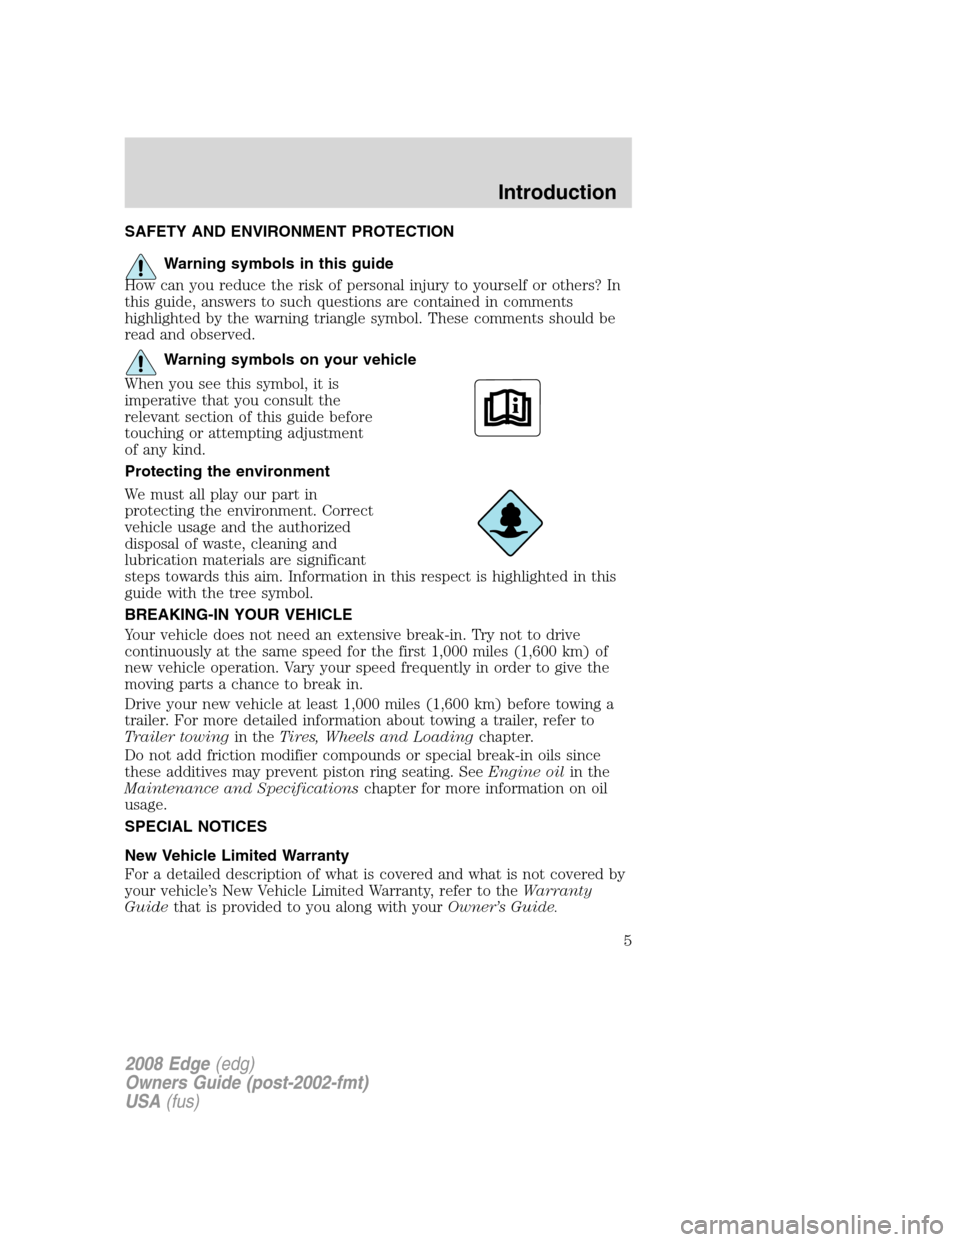 FORD EDGE 2008 1.G Owners Manual SAFETY AND ENVIRONMENT PROTECTION
Warning symbols in this guide
How can you reduce the risk of personal injury to yourself or others? In
this guide, answers to such questions are contained in comments